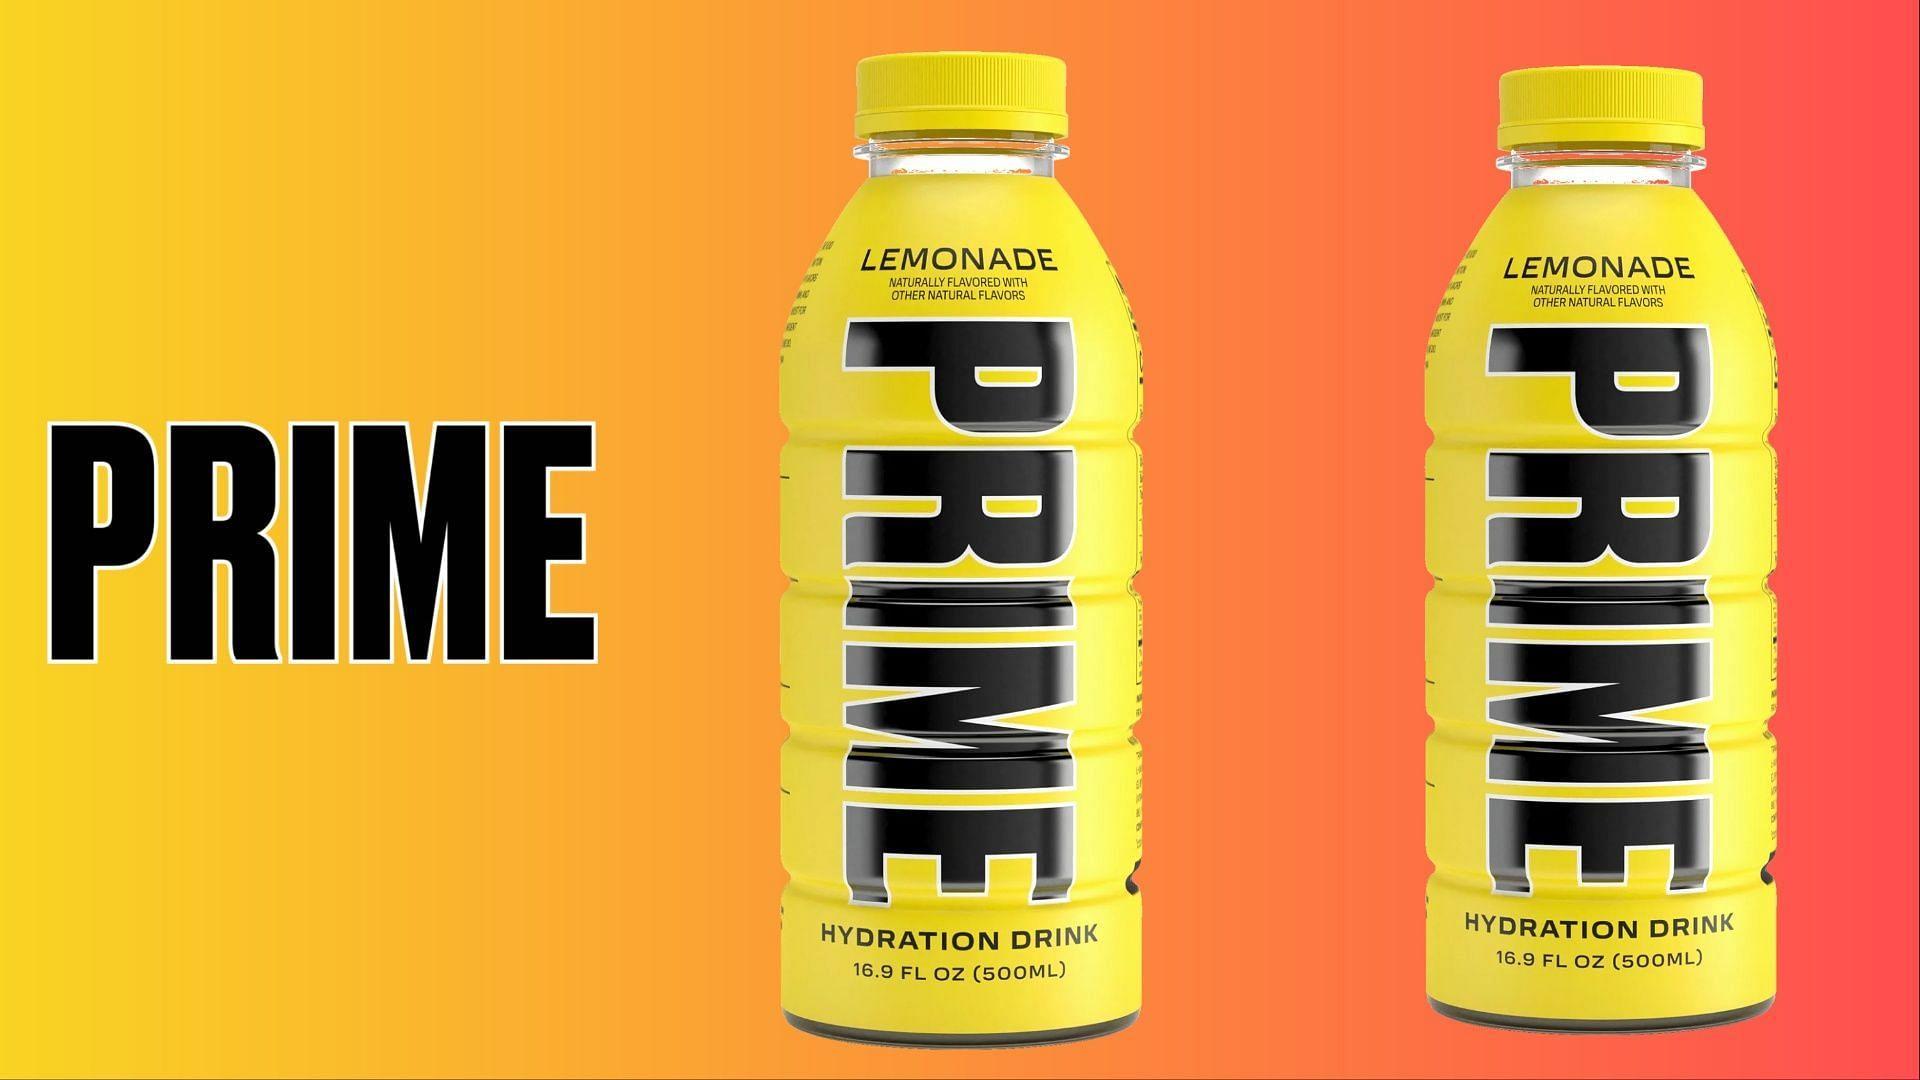 The new Lemonade Prime drink hits stores starting May 17